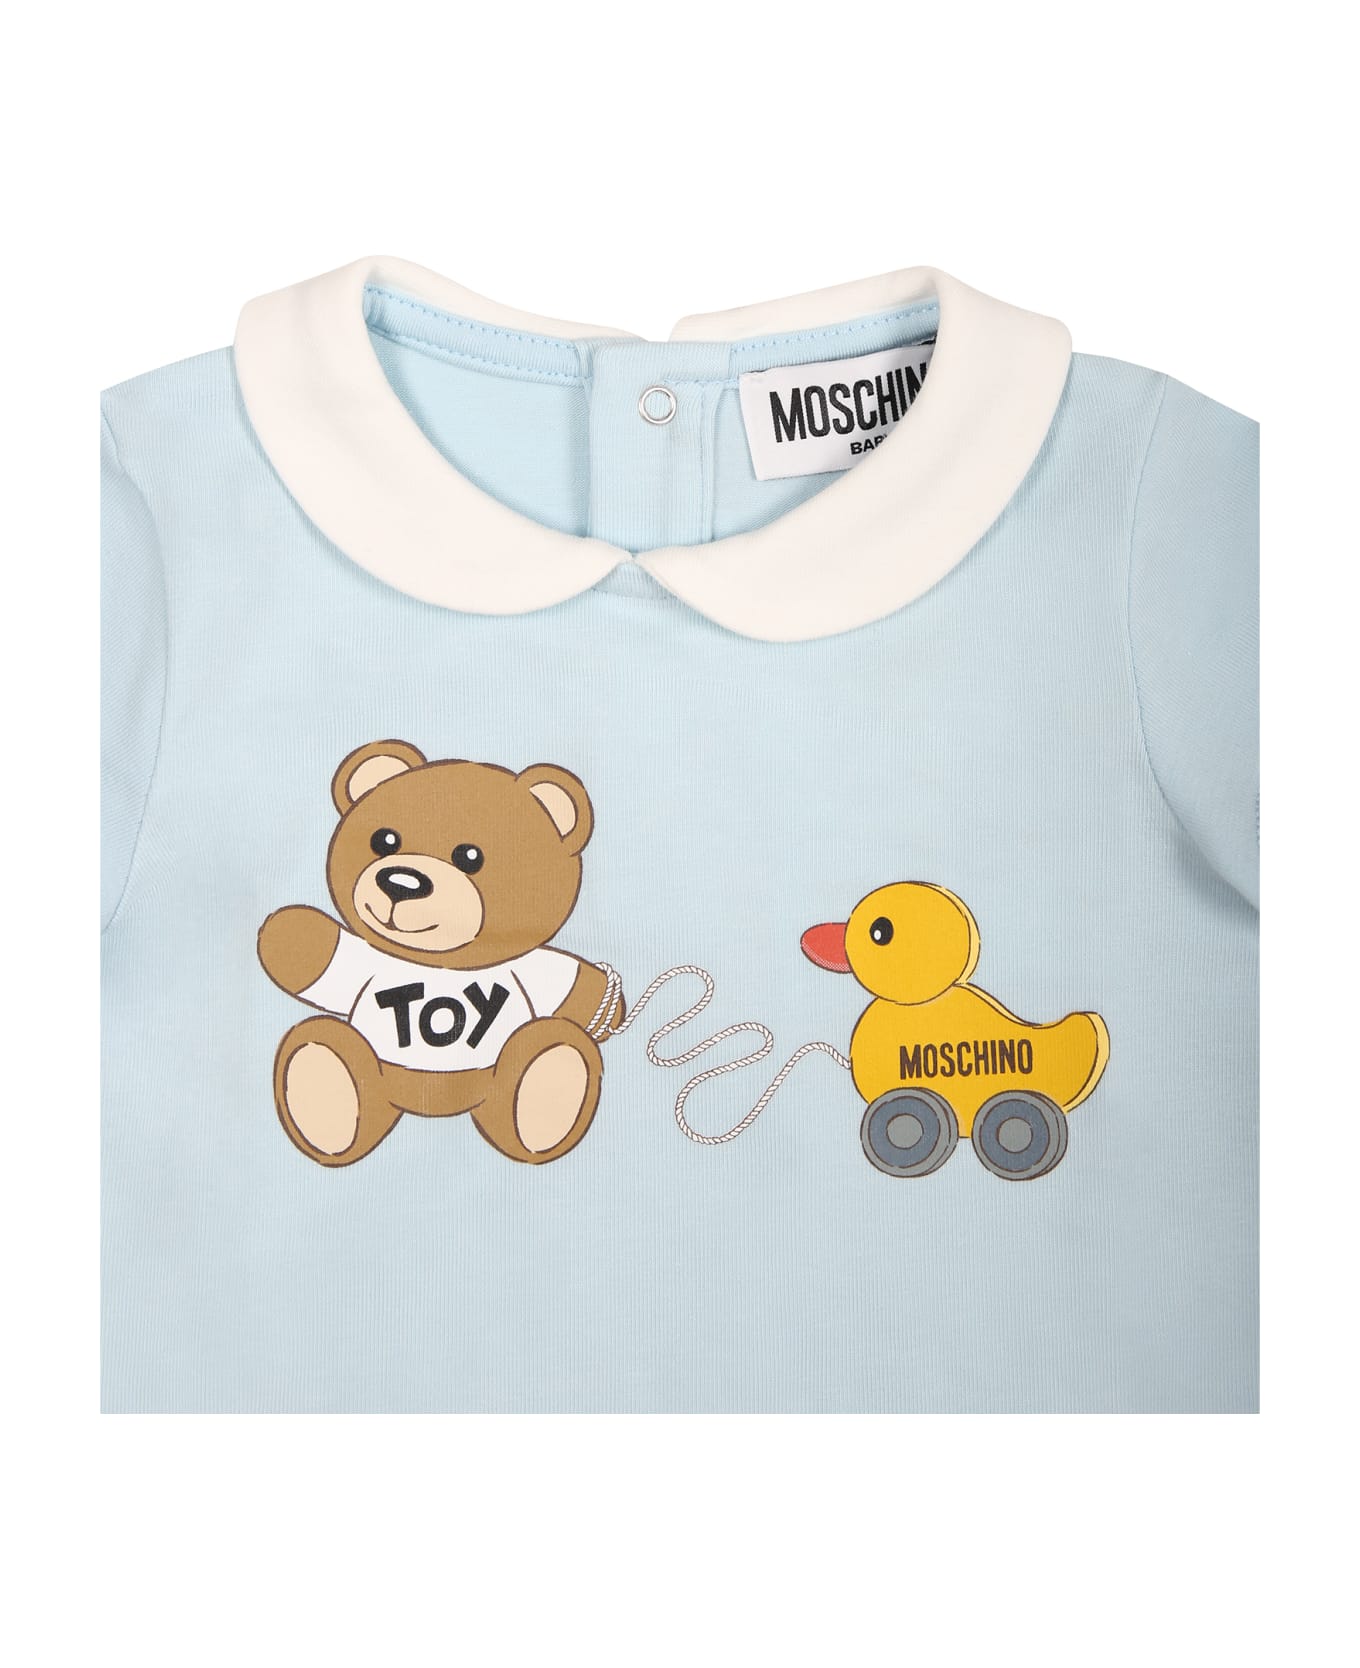 Moschino Light Blue Bodysuit For Baby Boy With Teddy Bear And Duck - Light Blue